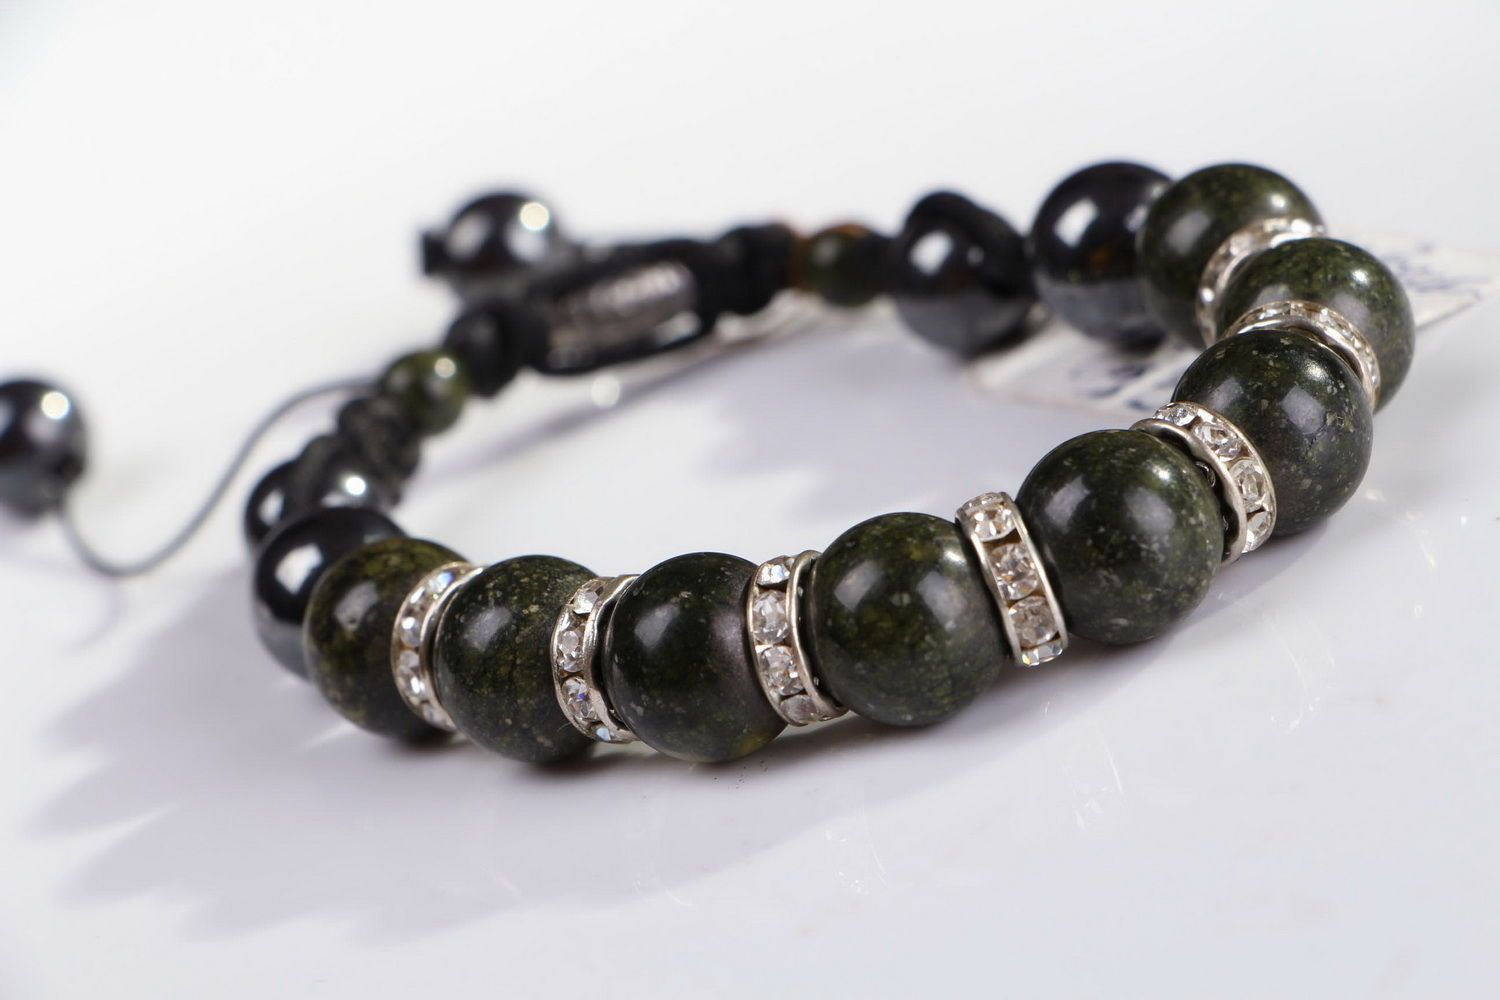 Bracelet made from serpentine beads and hematite photo 1